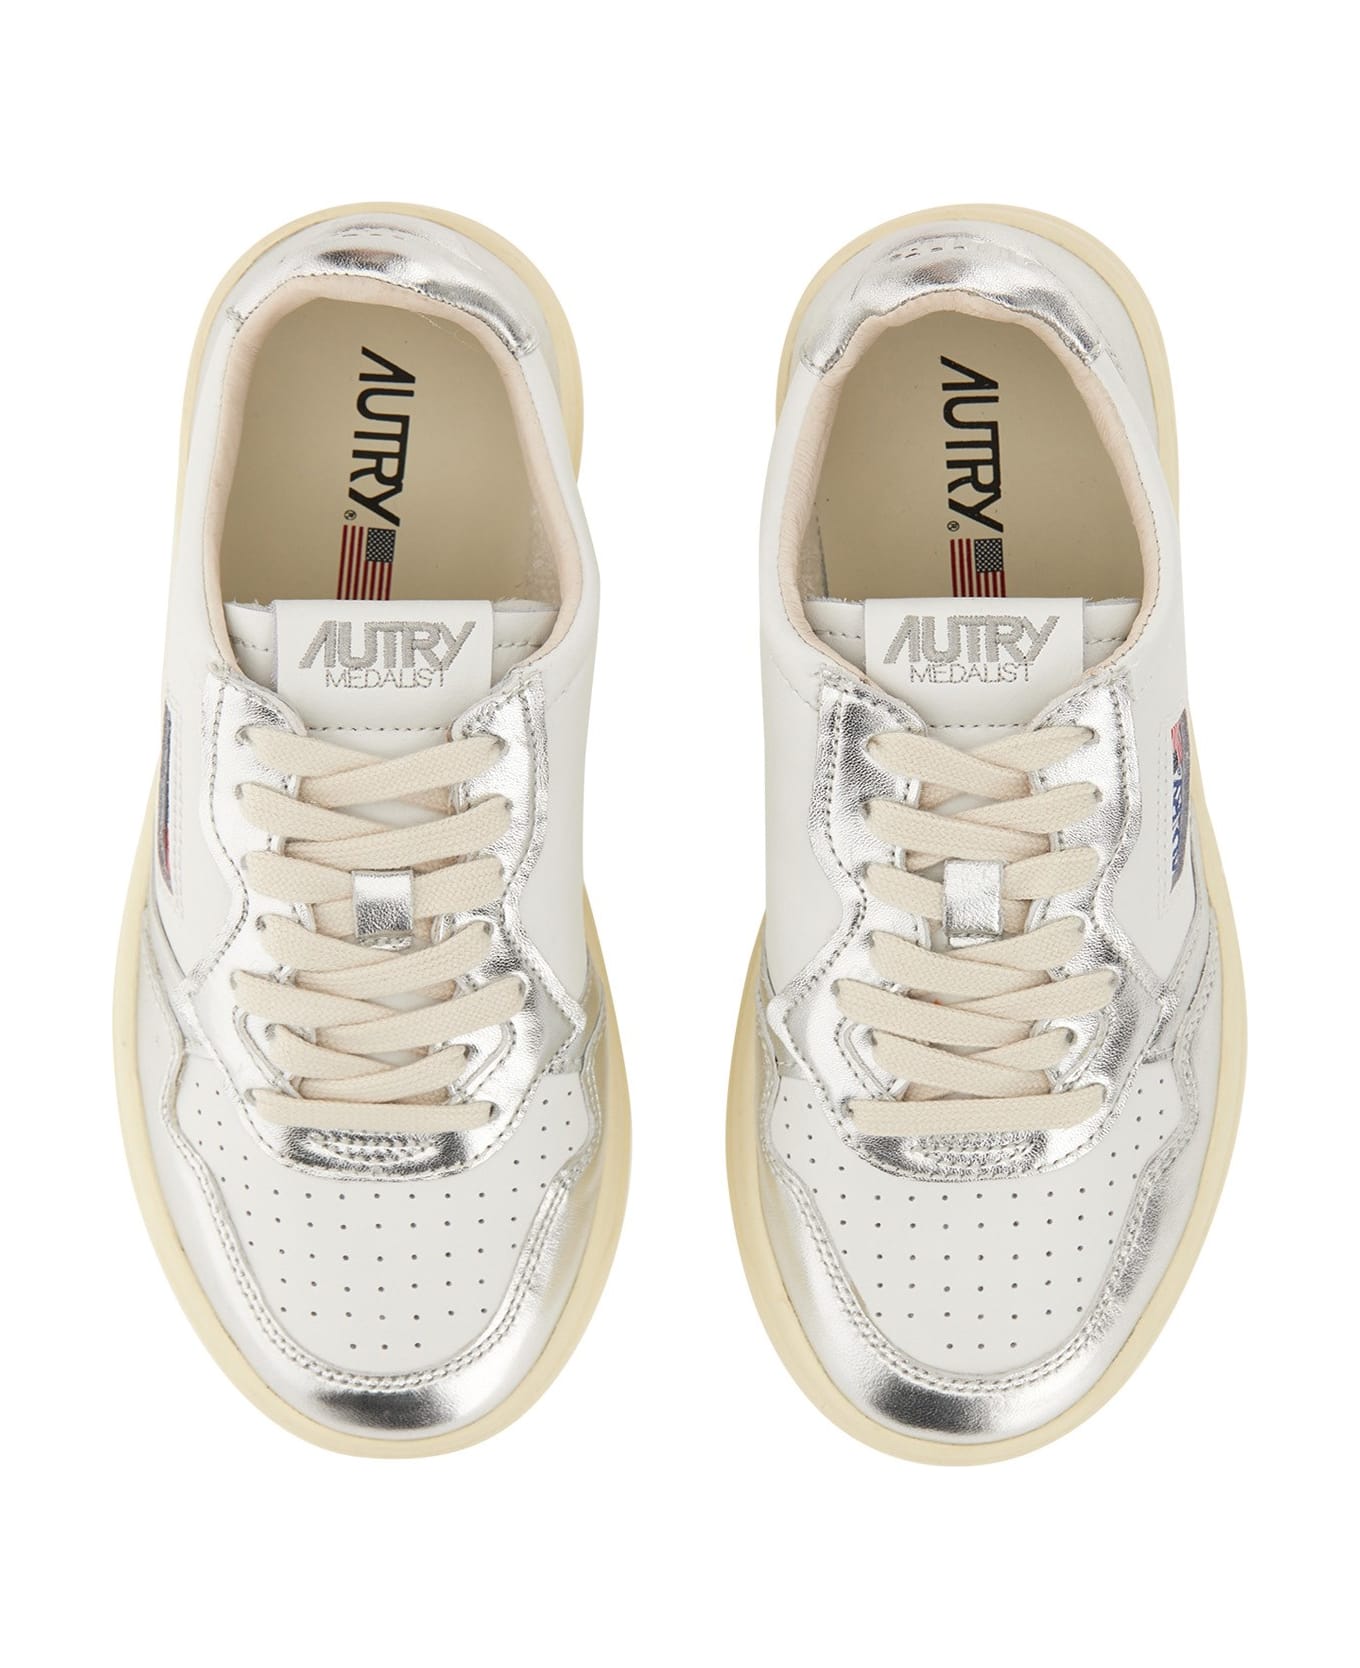 Autry Medalist Low Sneakers - White/silver